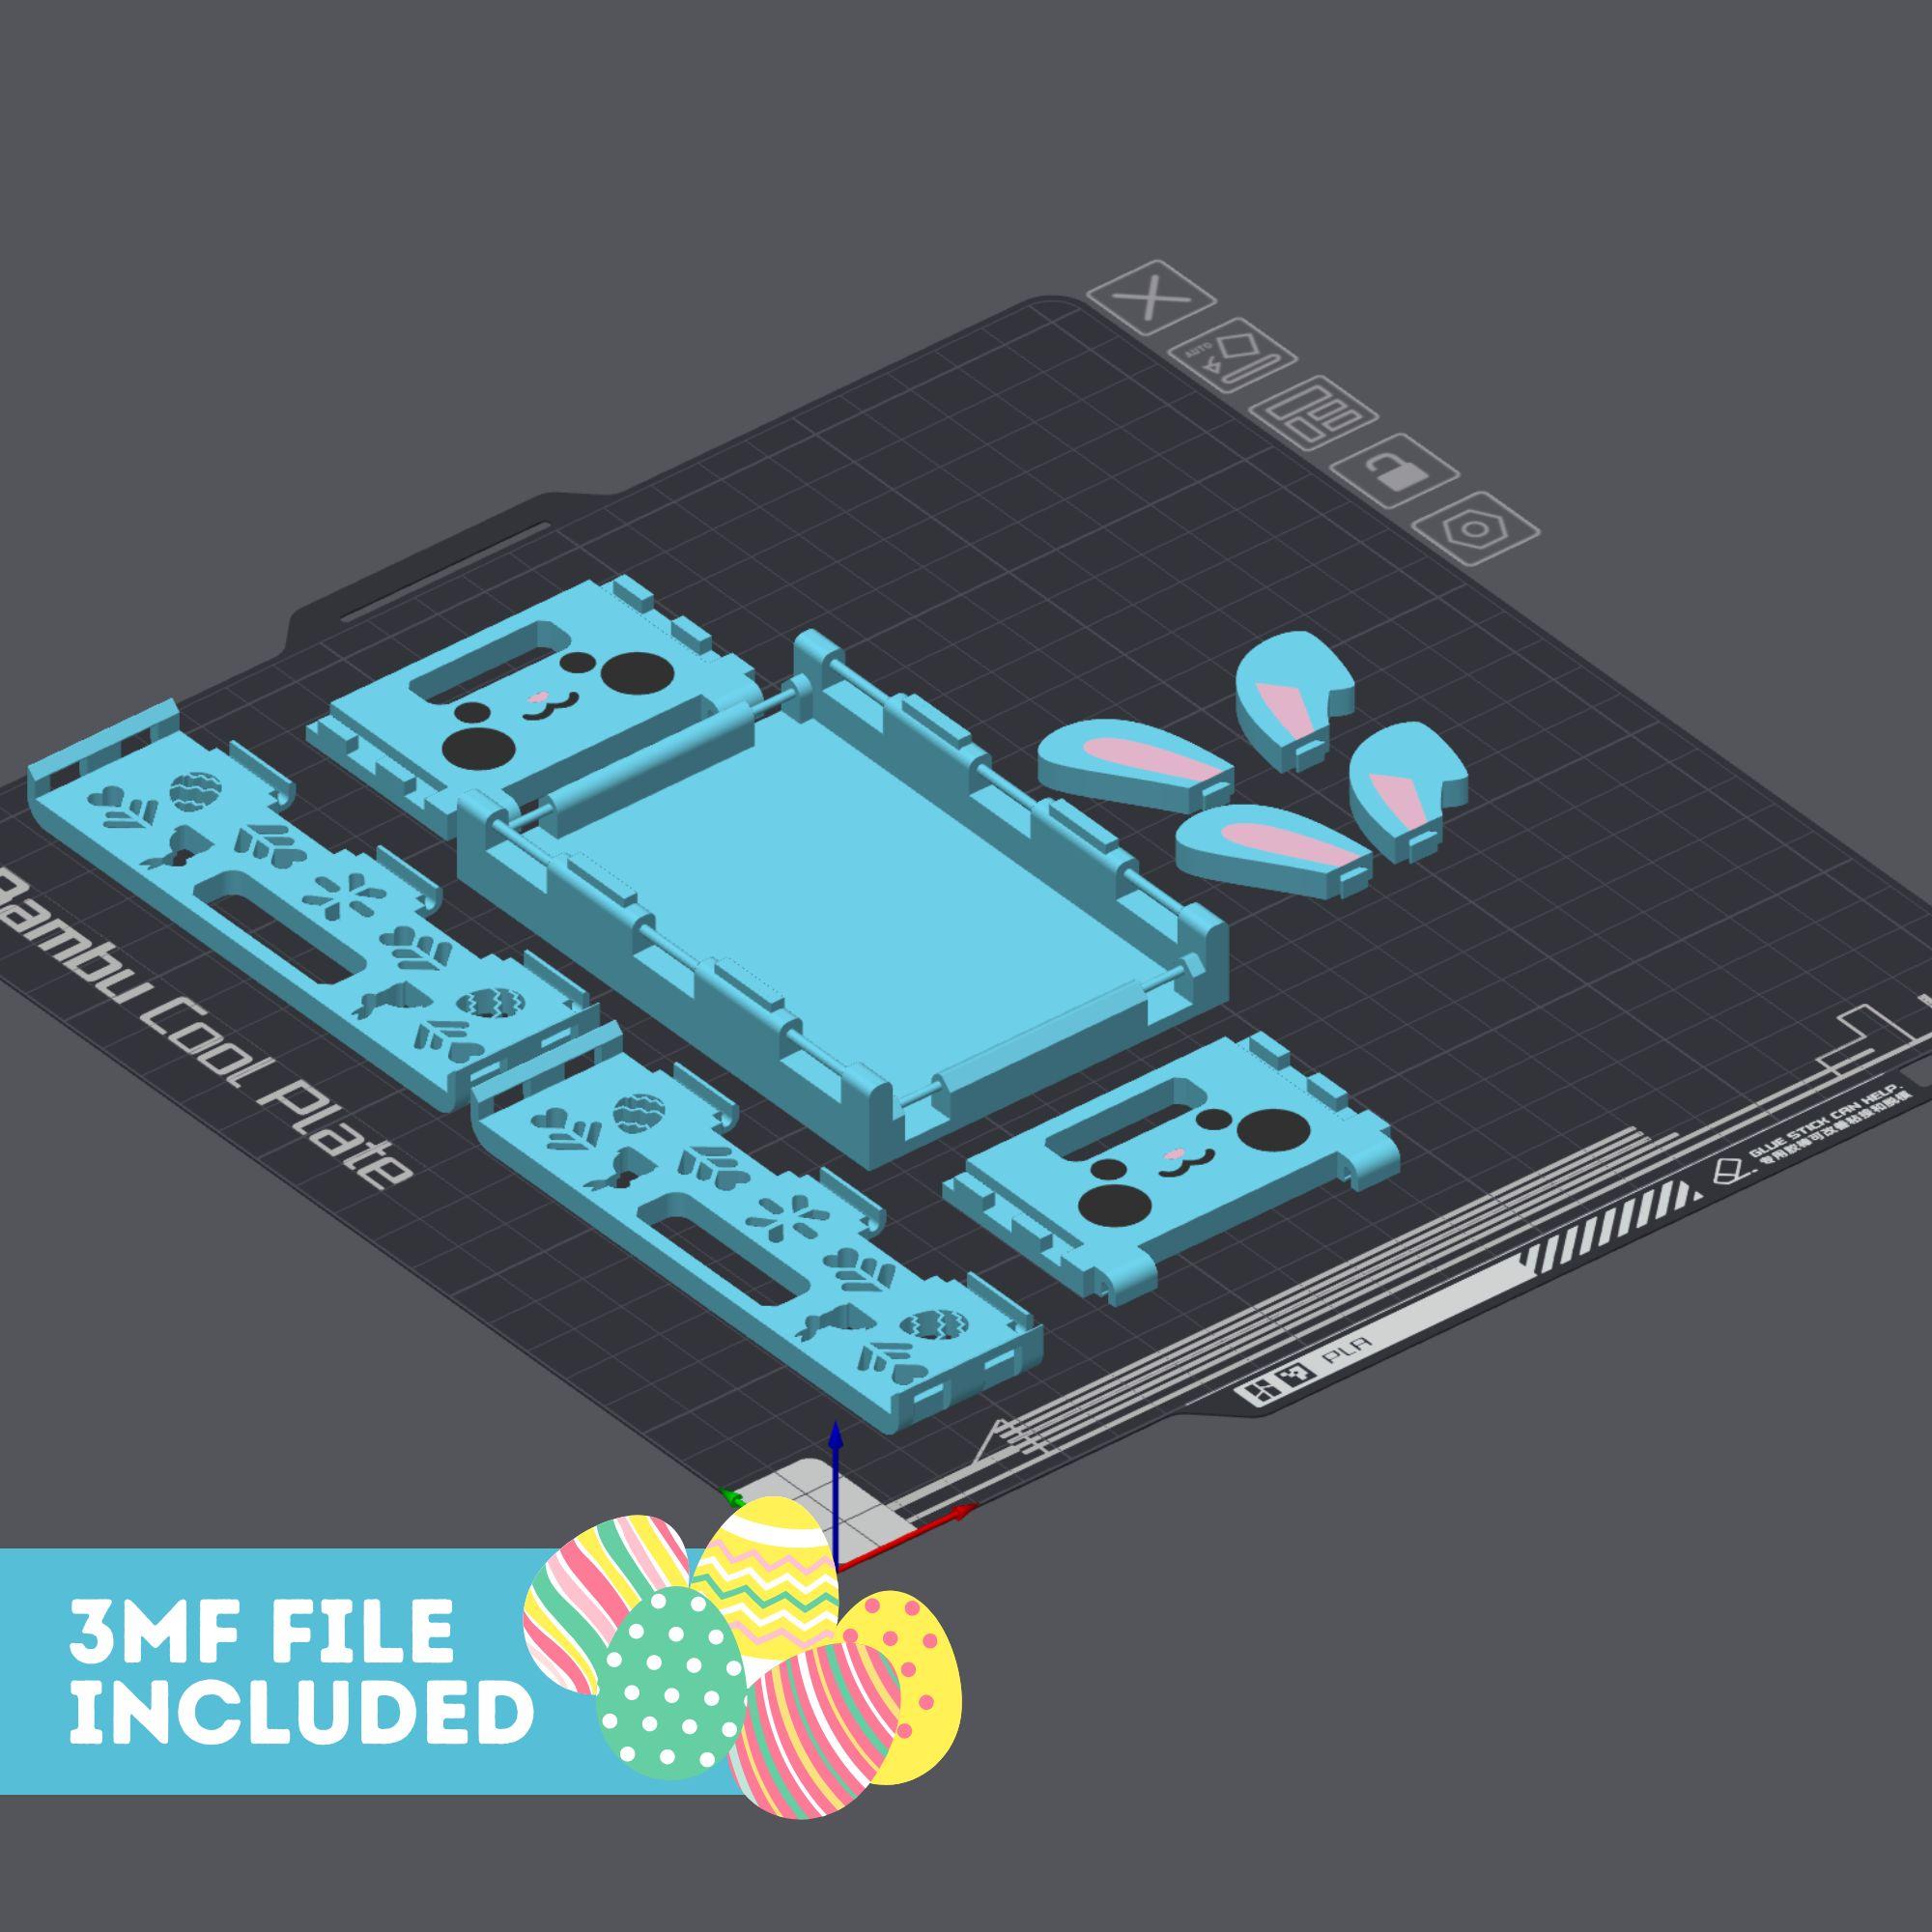 3D Printable Easter Foldable and Stackable Storage Crate Easter Edition 3d model